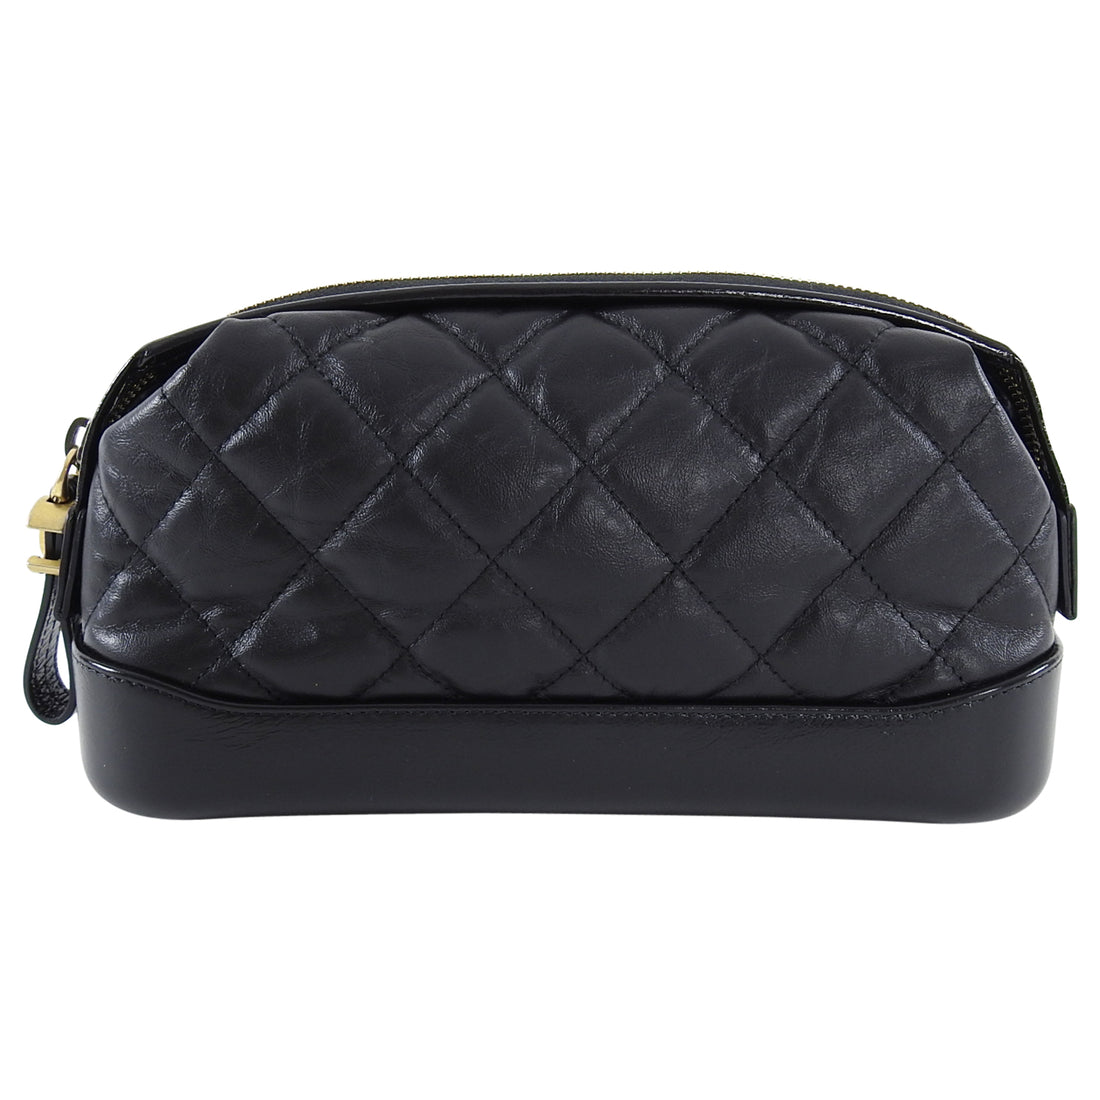 Chanel - Authenticated Gabrielle Clutch Bag - Leather Black for Women, Never Worn